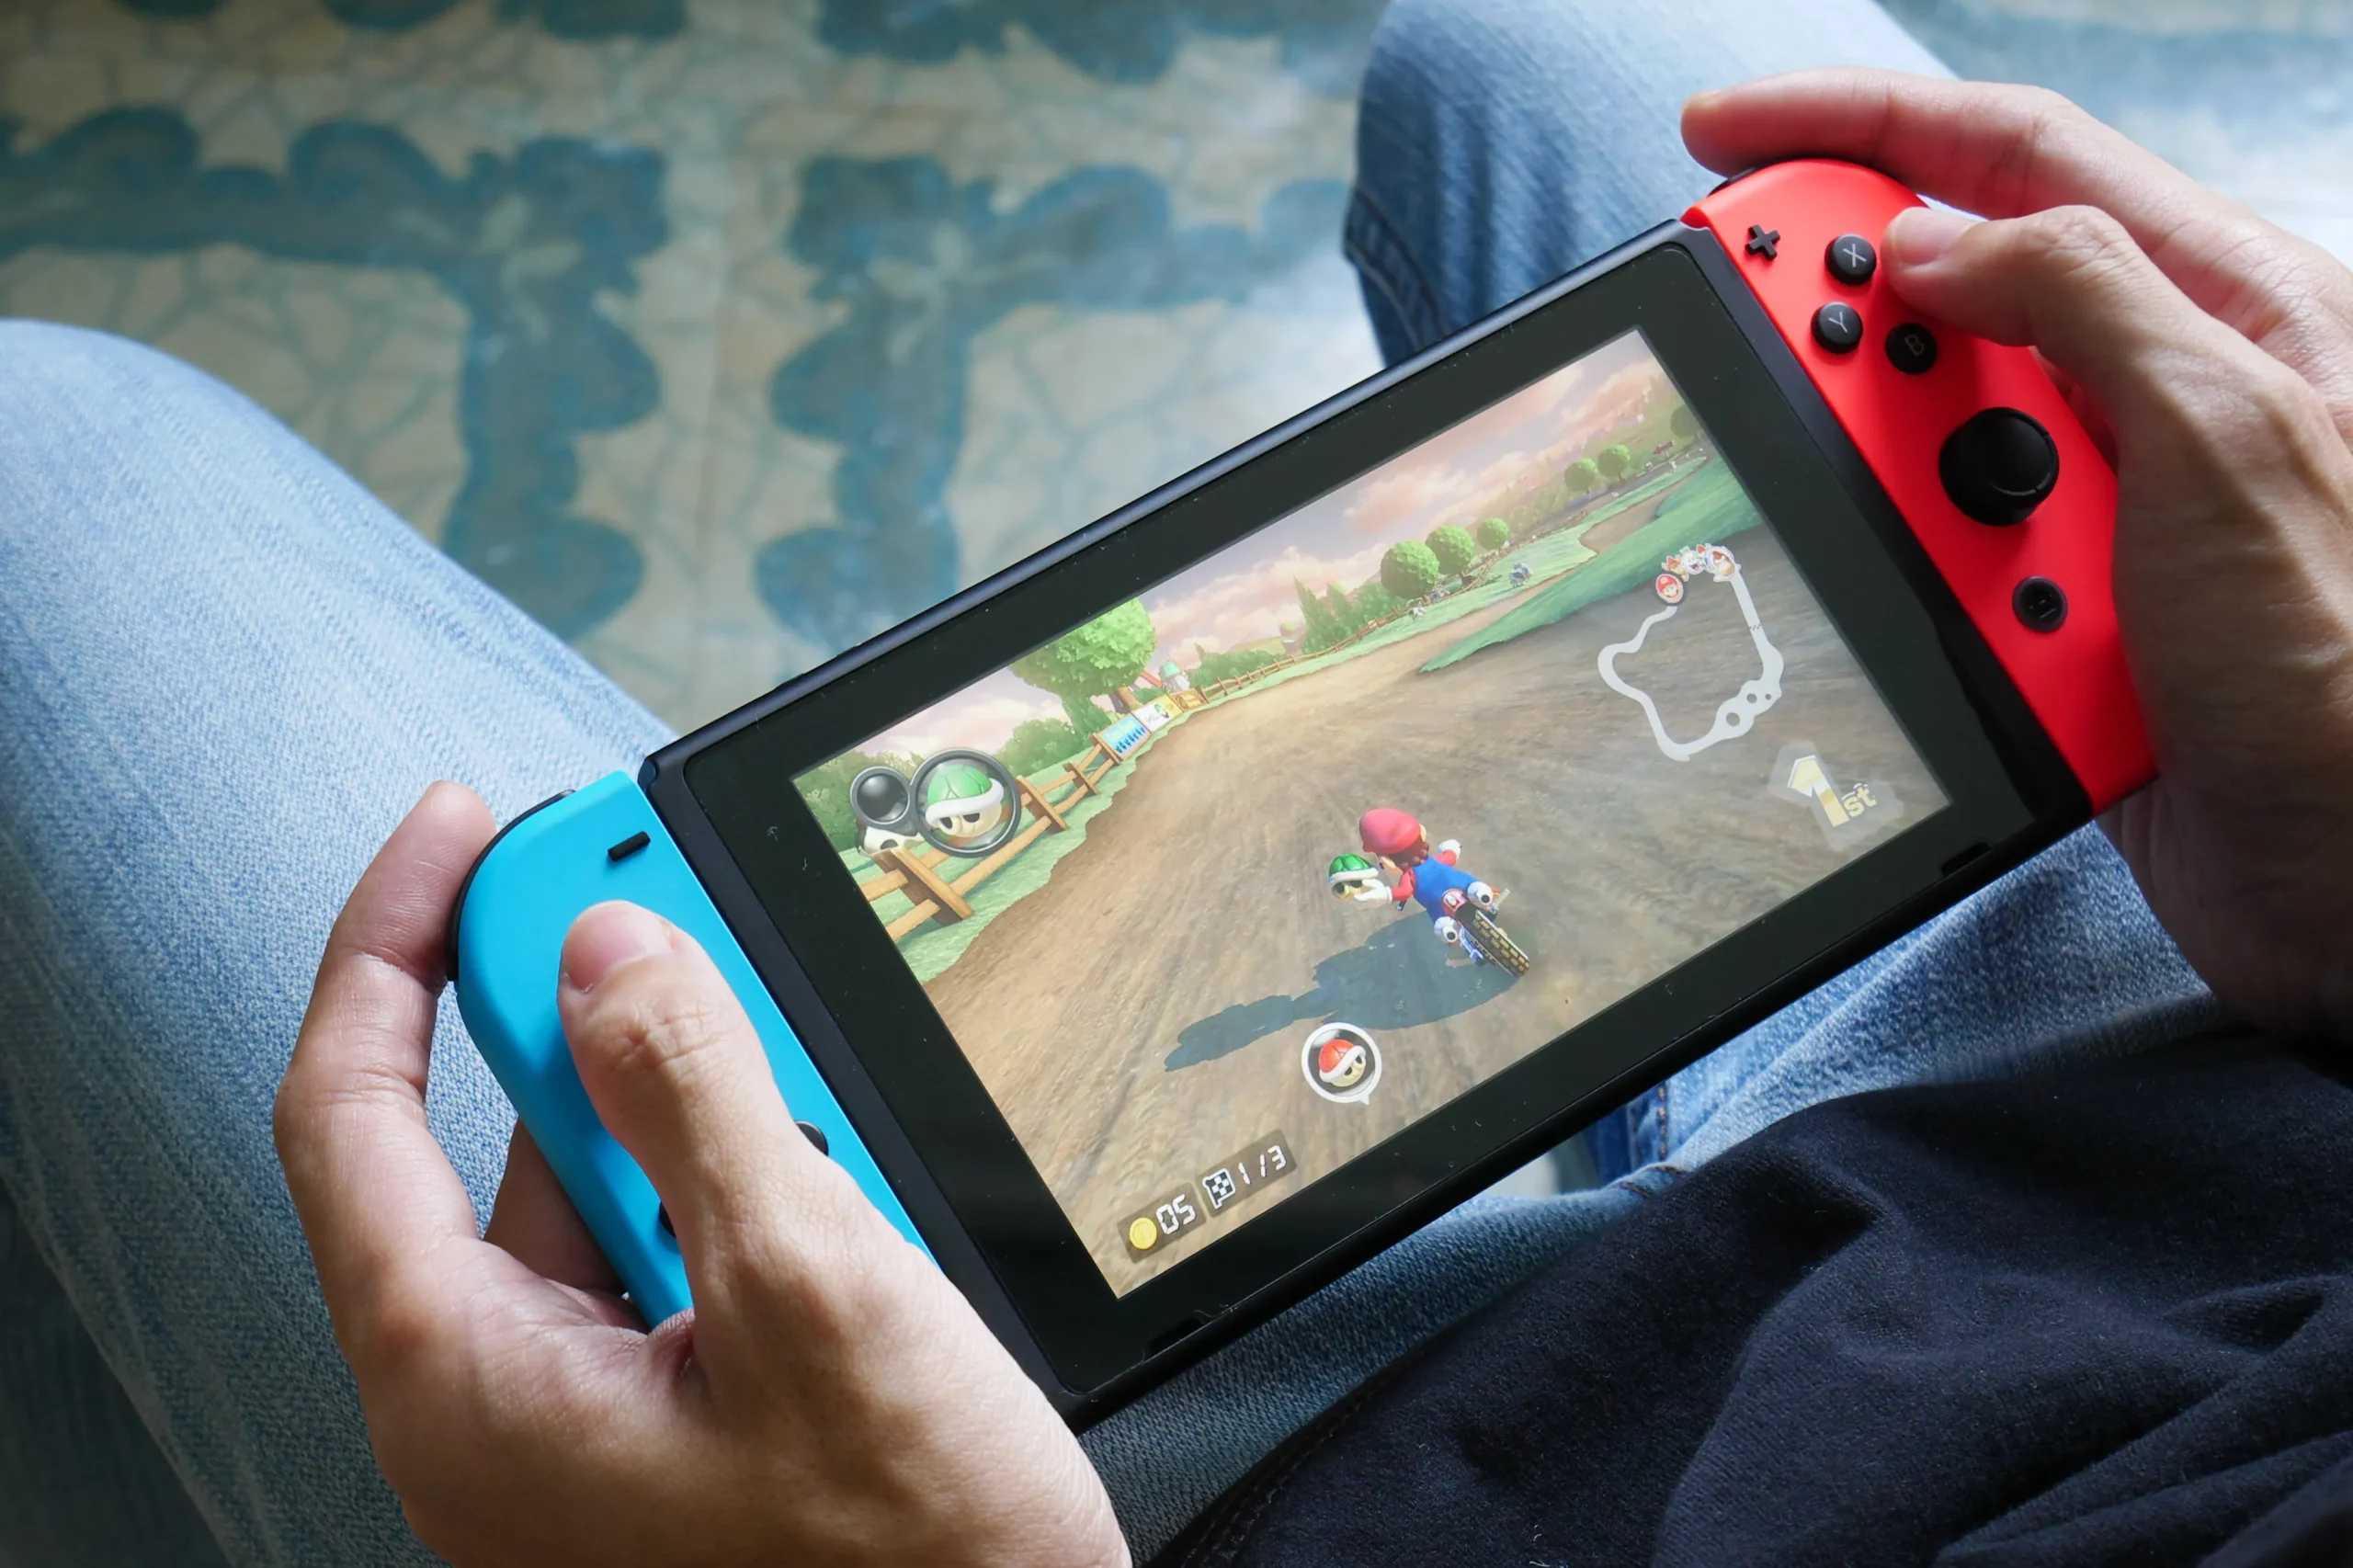 Nintendo Sues Individuals Over Console Mods and Pirated Games: Aiming to Protect Copyright and Combat Piracy